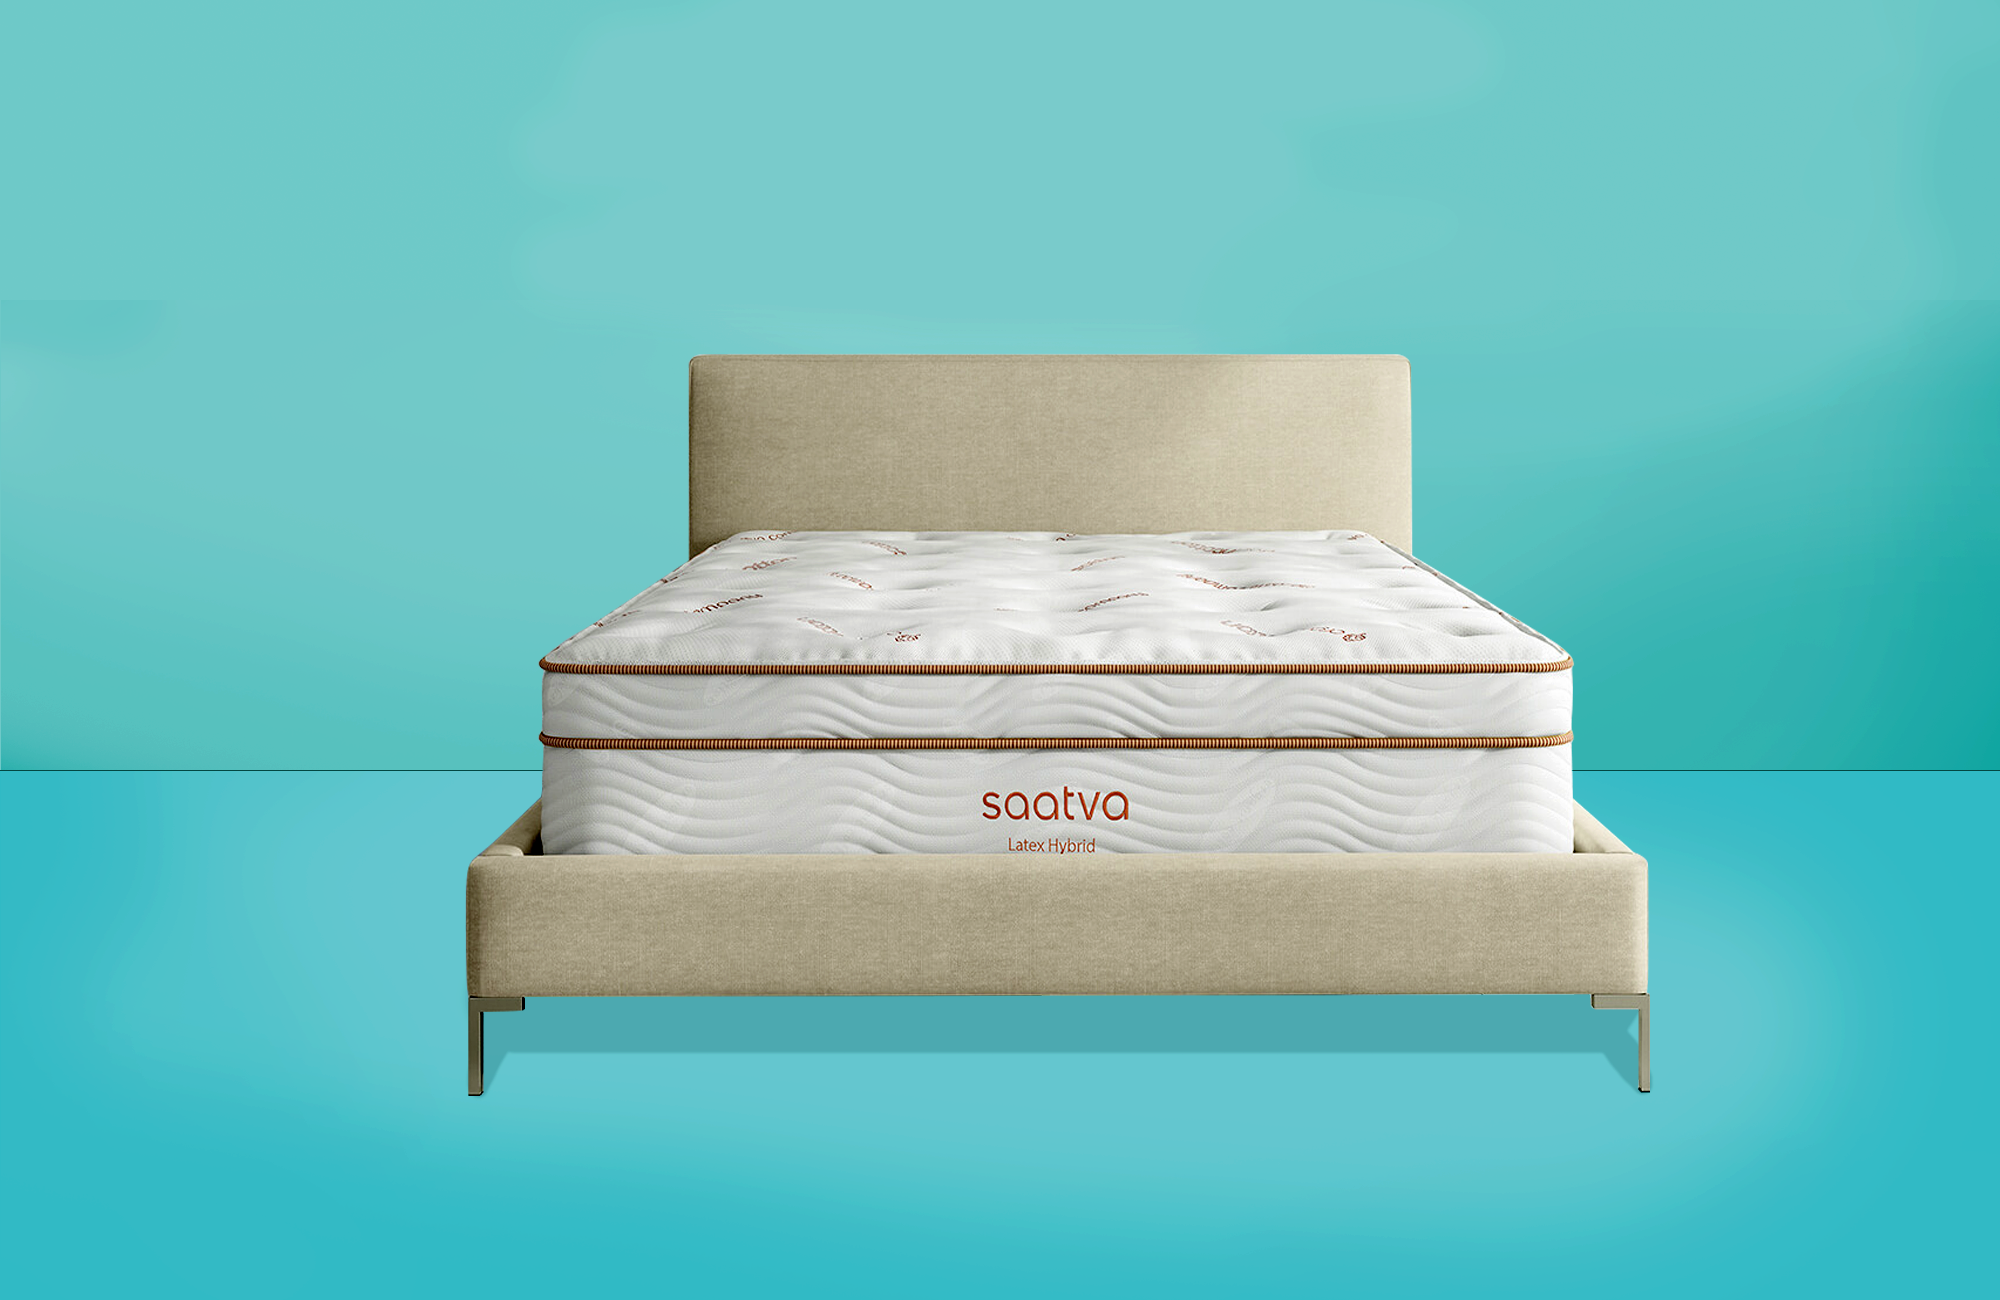 Top Mattress And Bed Brands Reviewed, How To Know If Your Bed Is A Queen